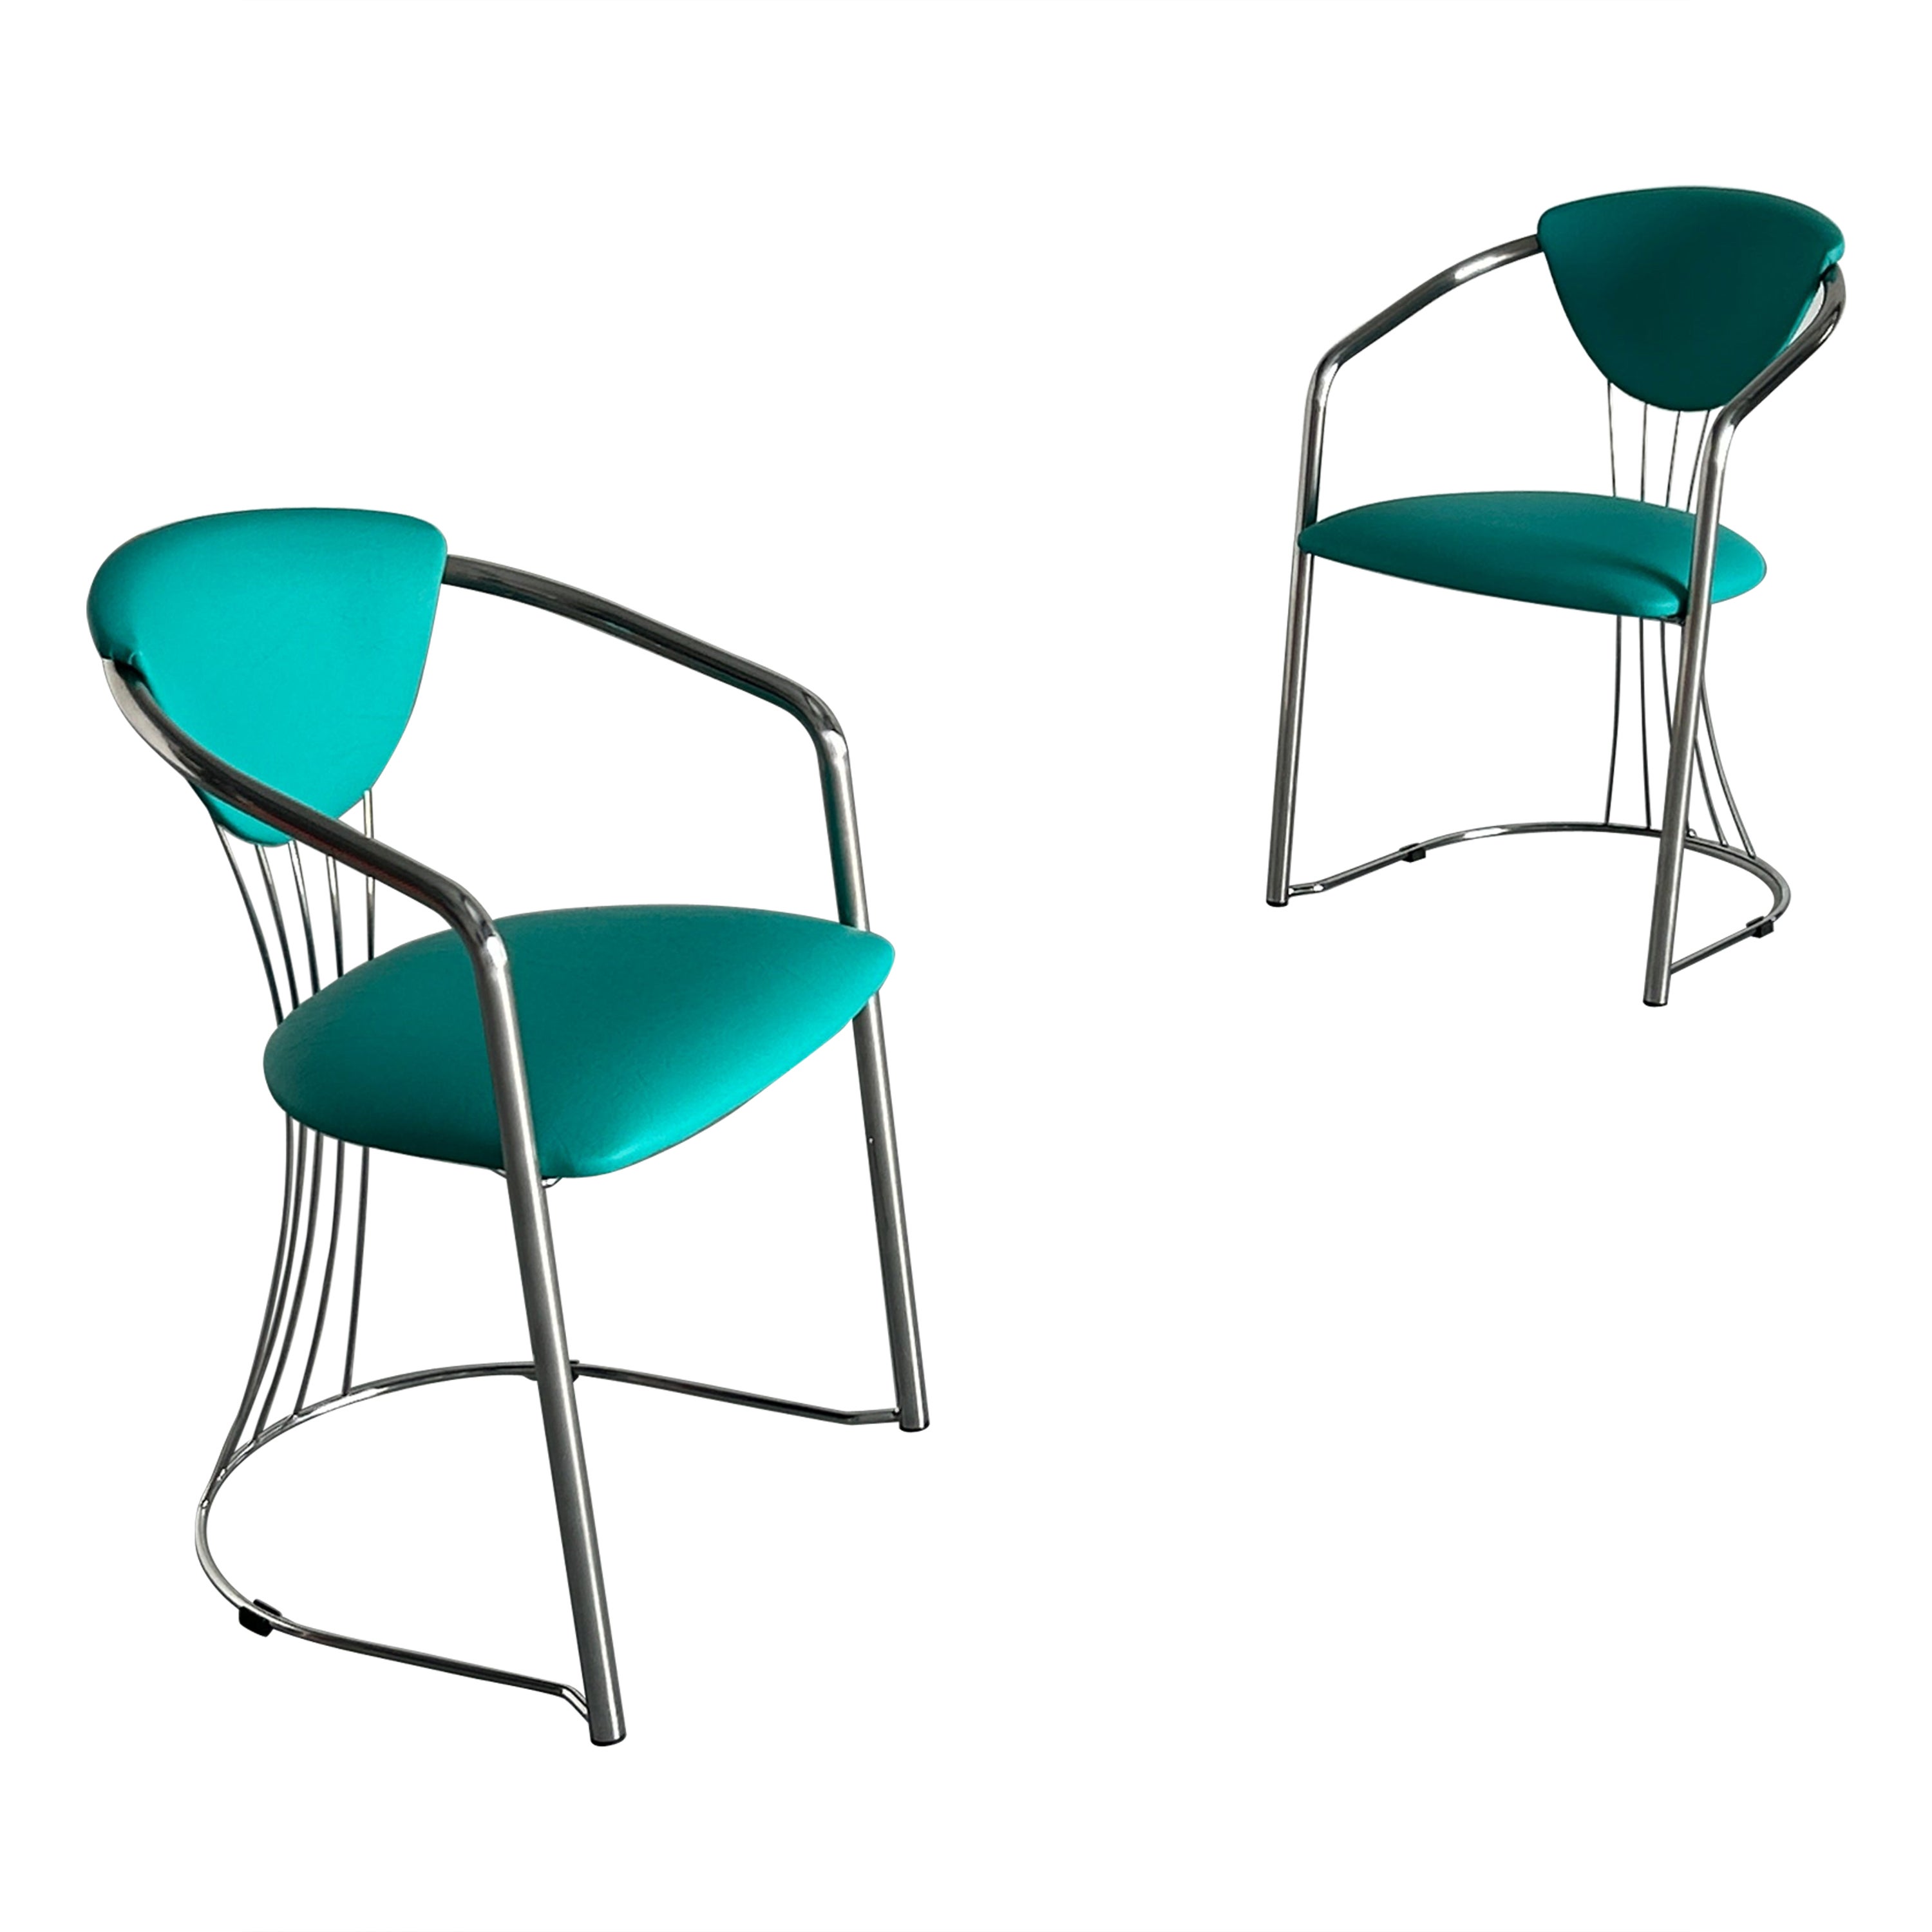 1 of 2 Vintage Steel and Mint Green Faux Leather Dining Chairs by Effezeta, 90s